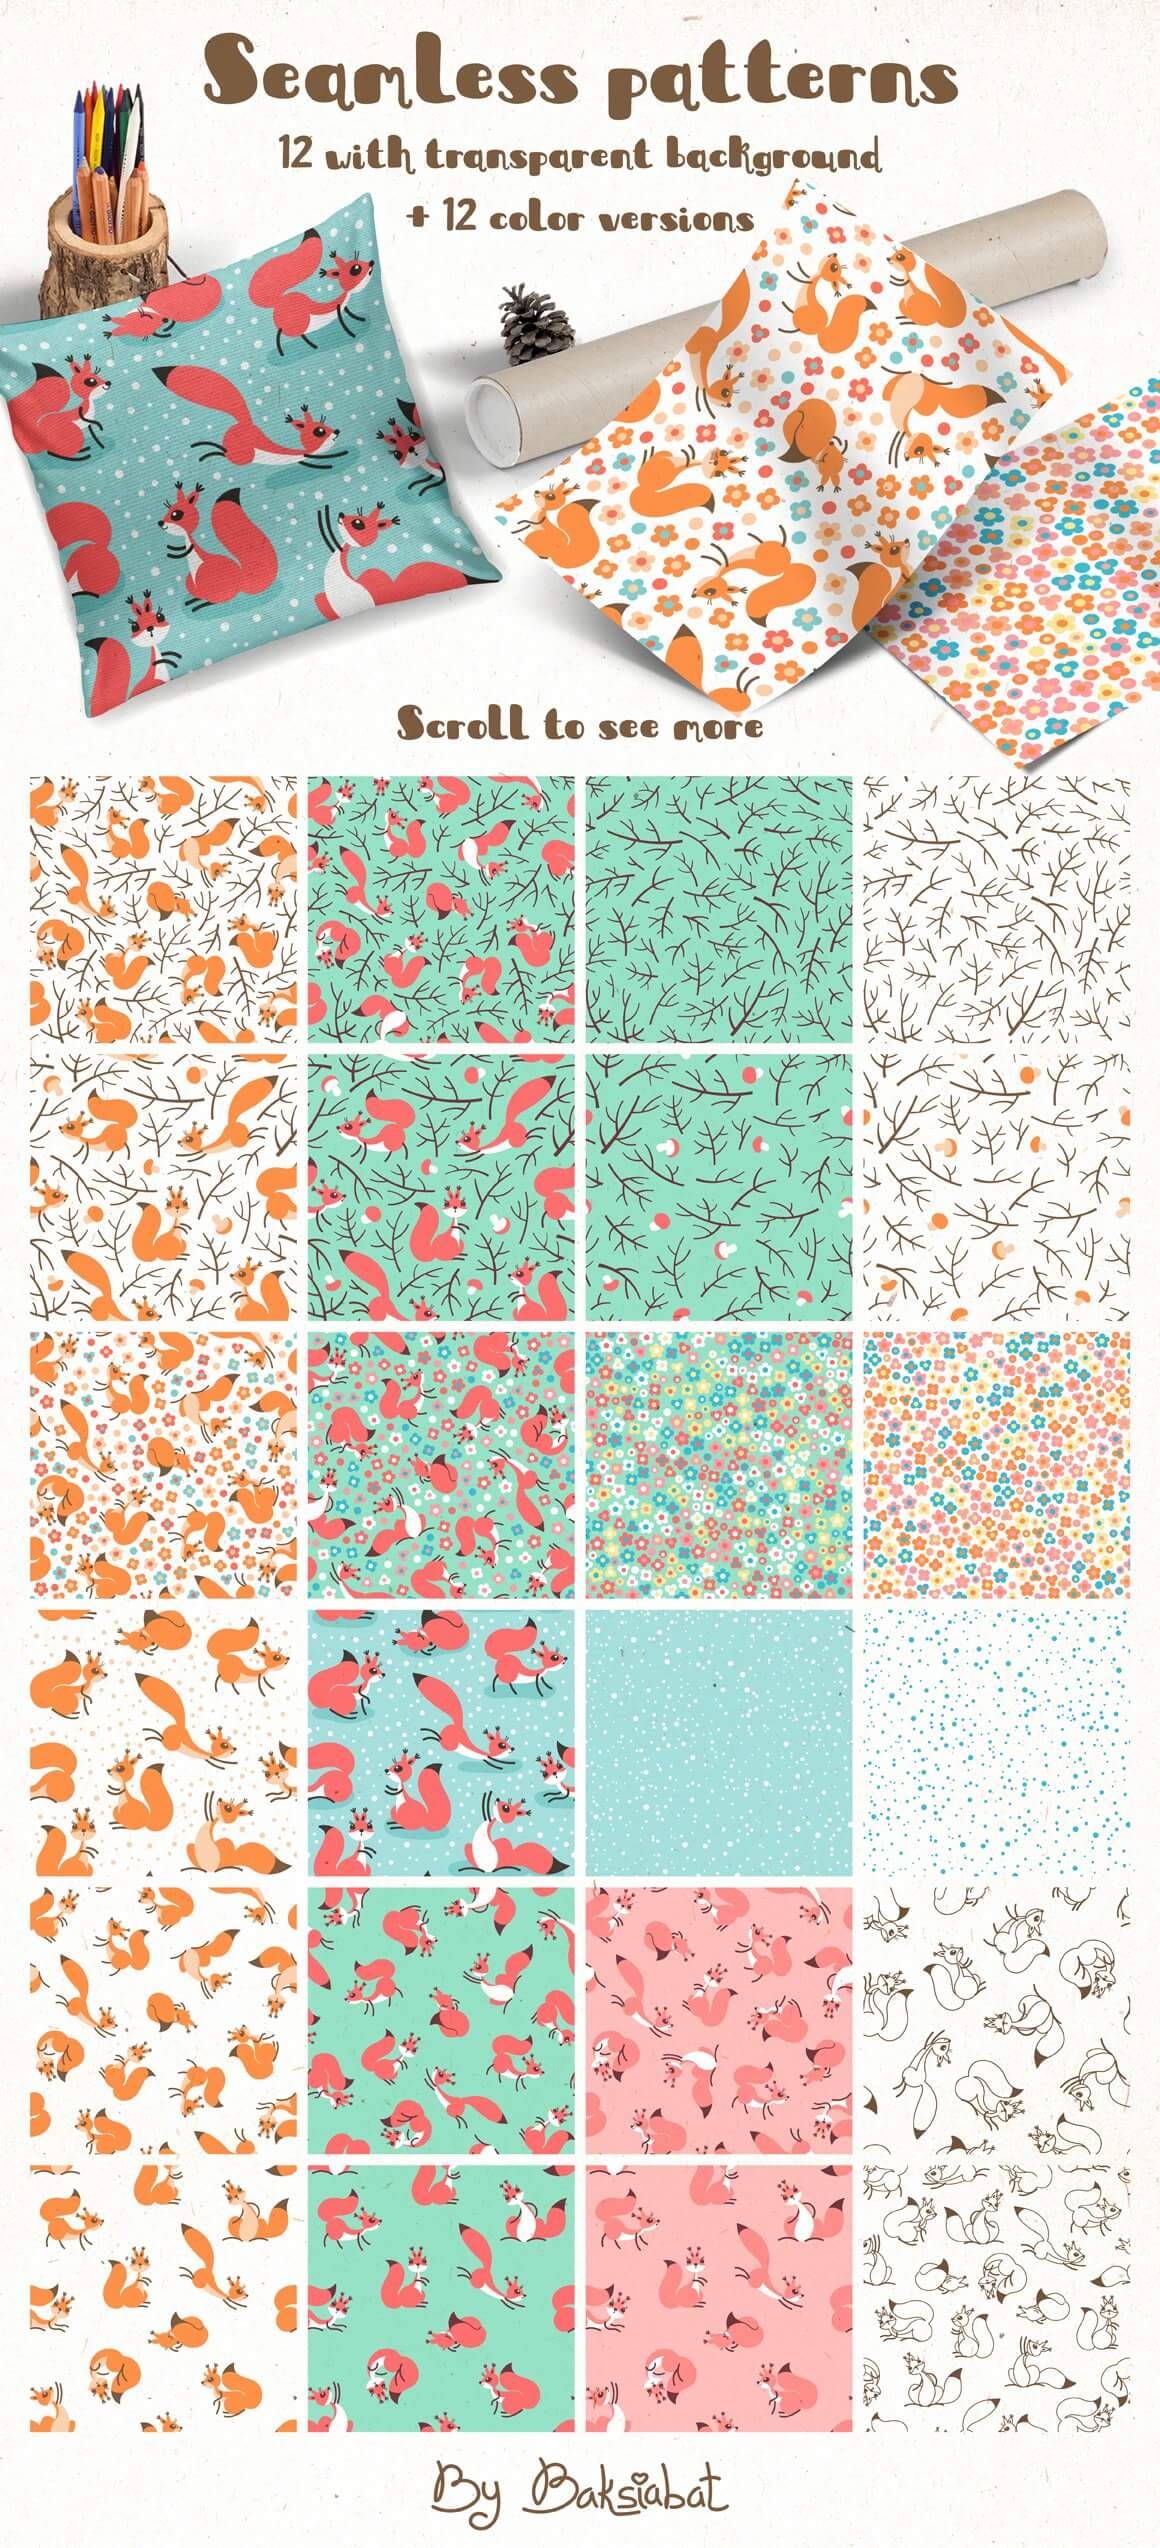 Seamless squirells patterns, 12 with transparent background plus 12 color versions.